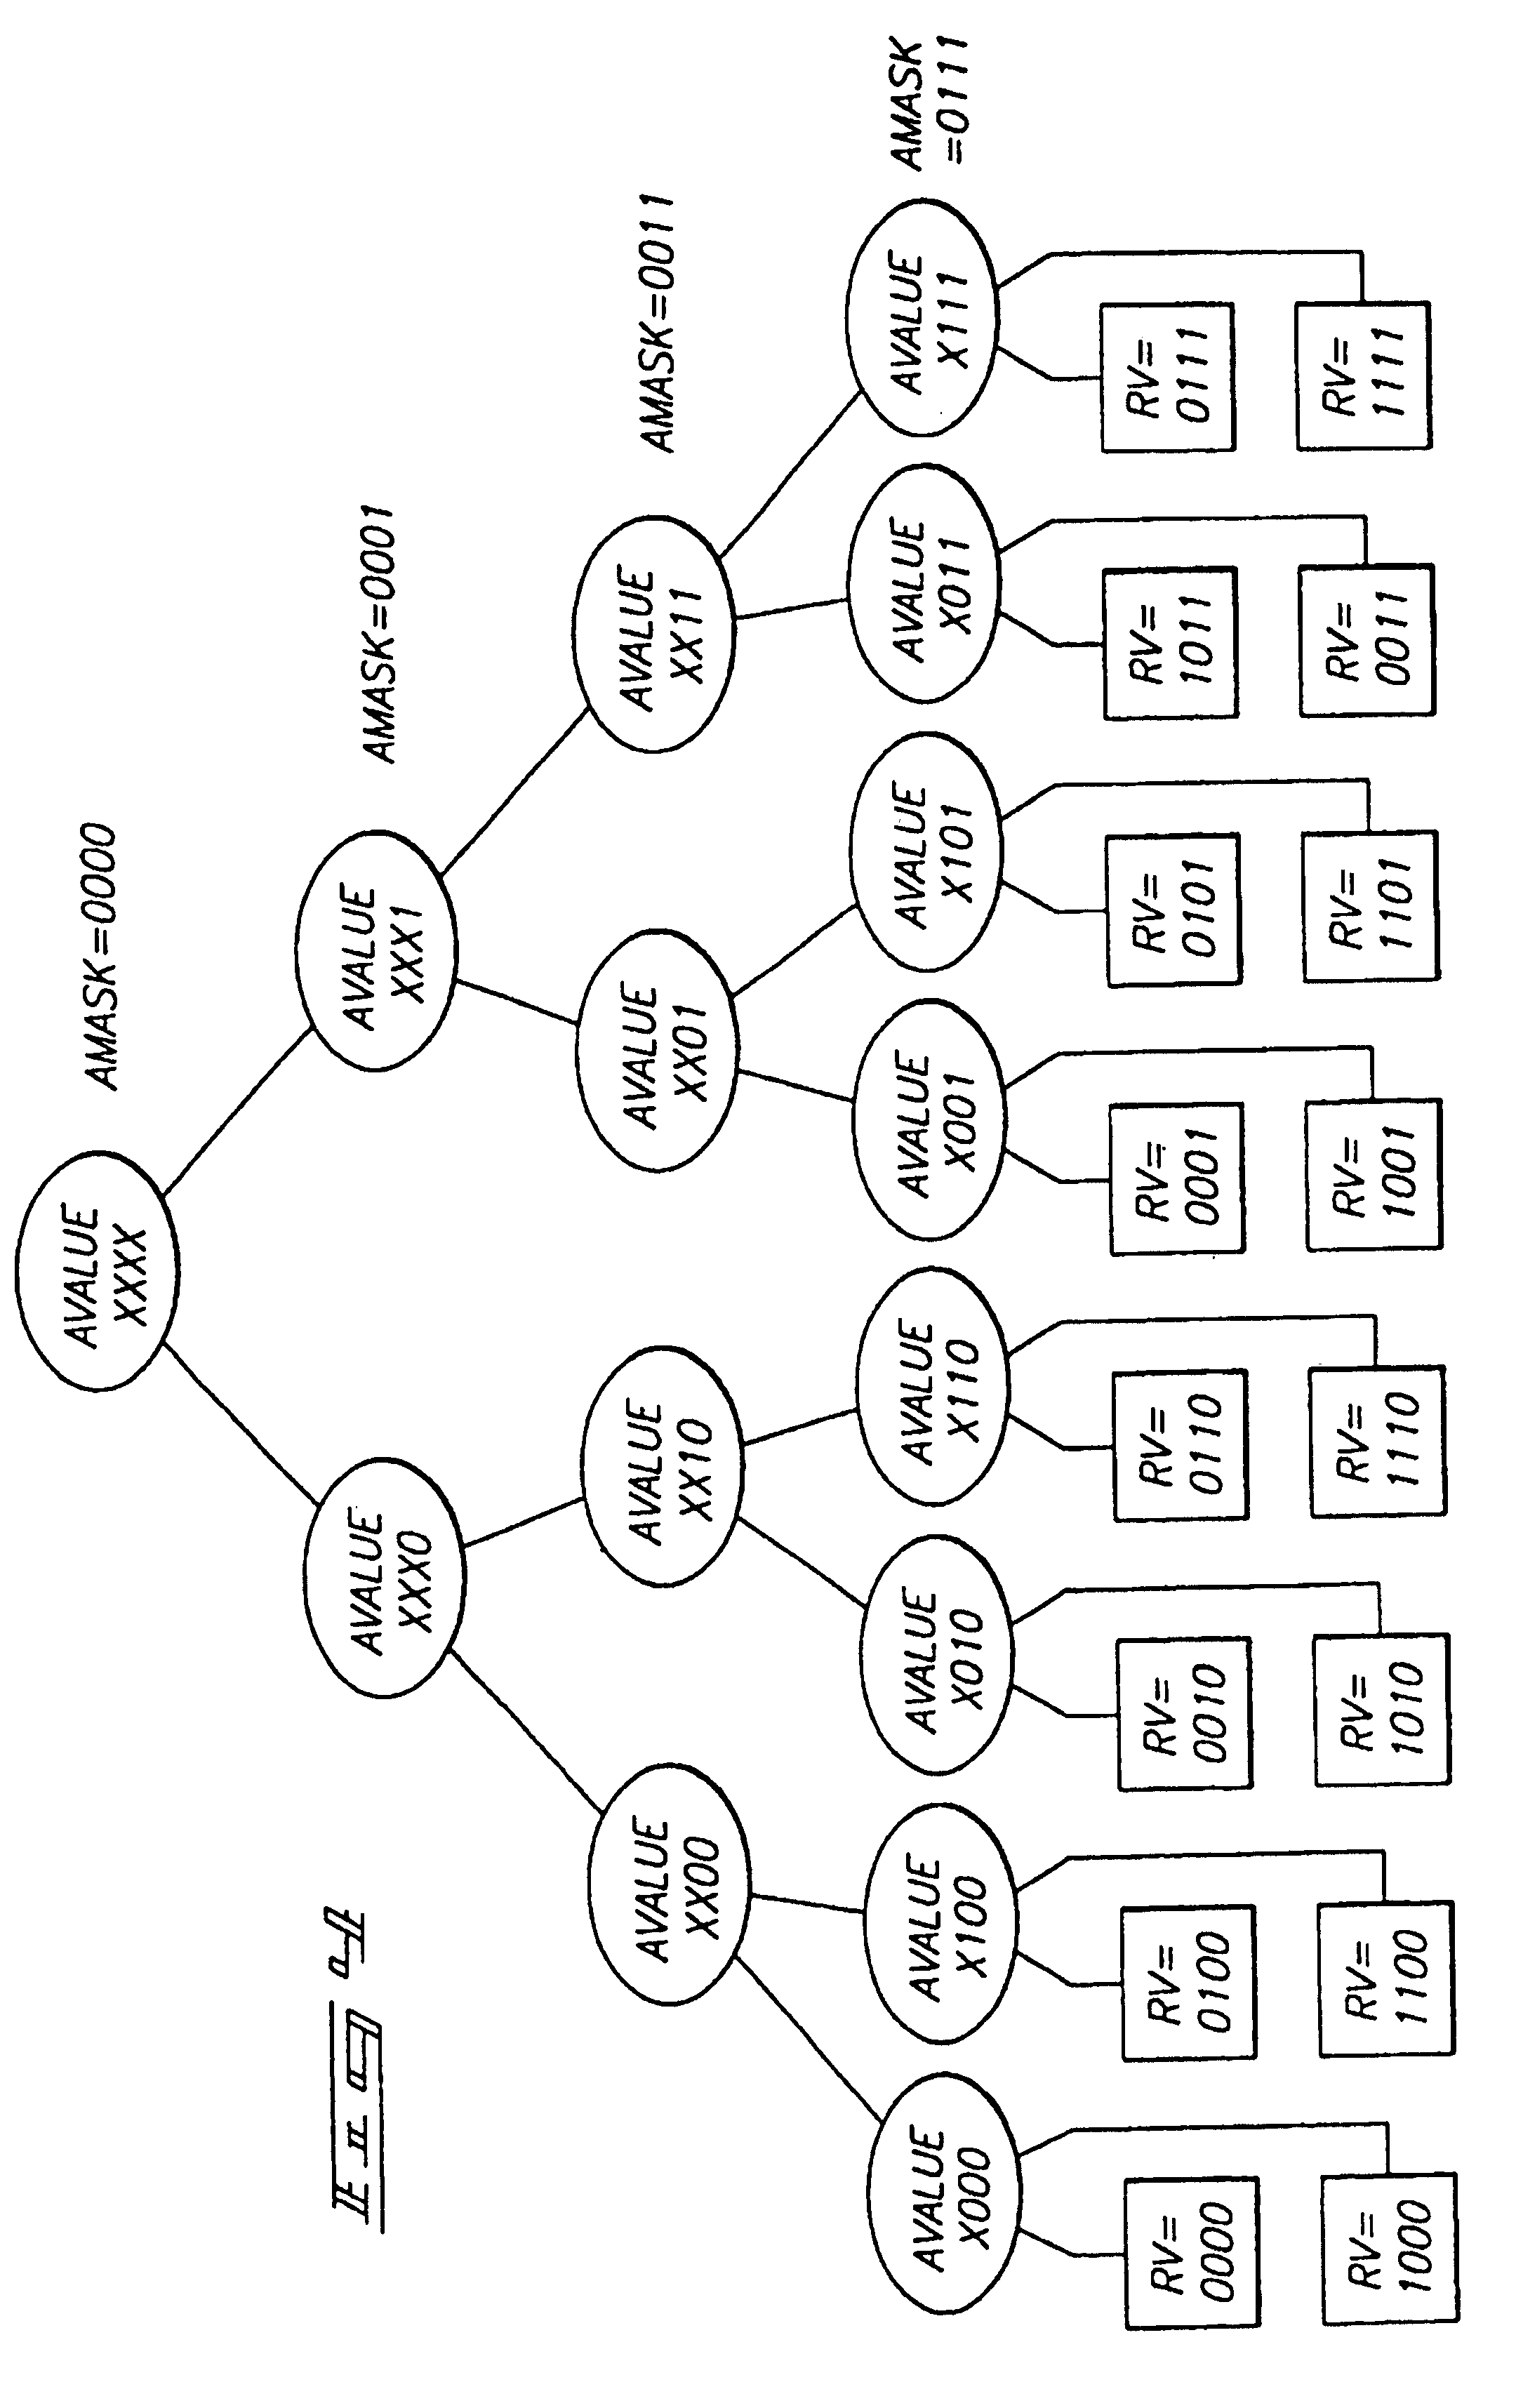 Method and apparatus to manage RFID tags